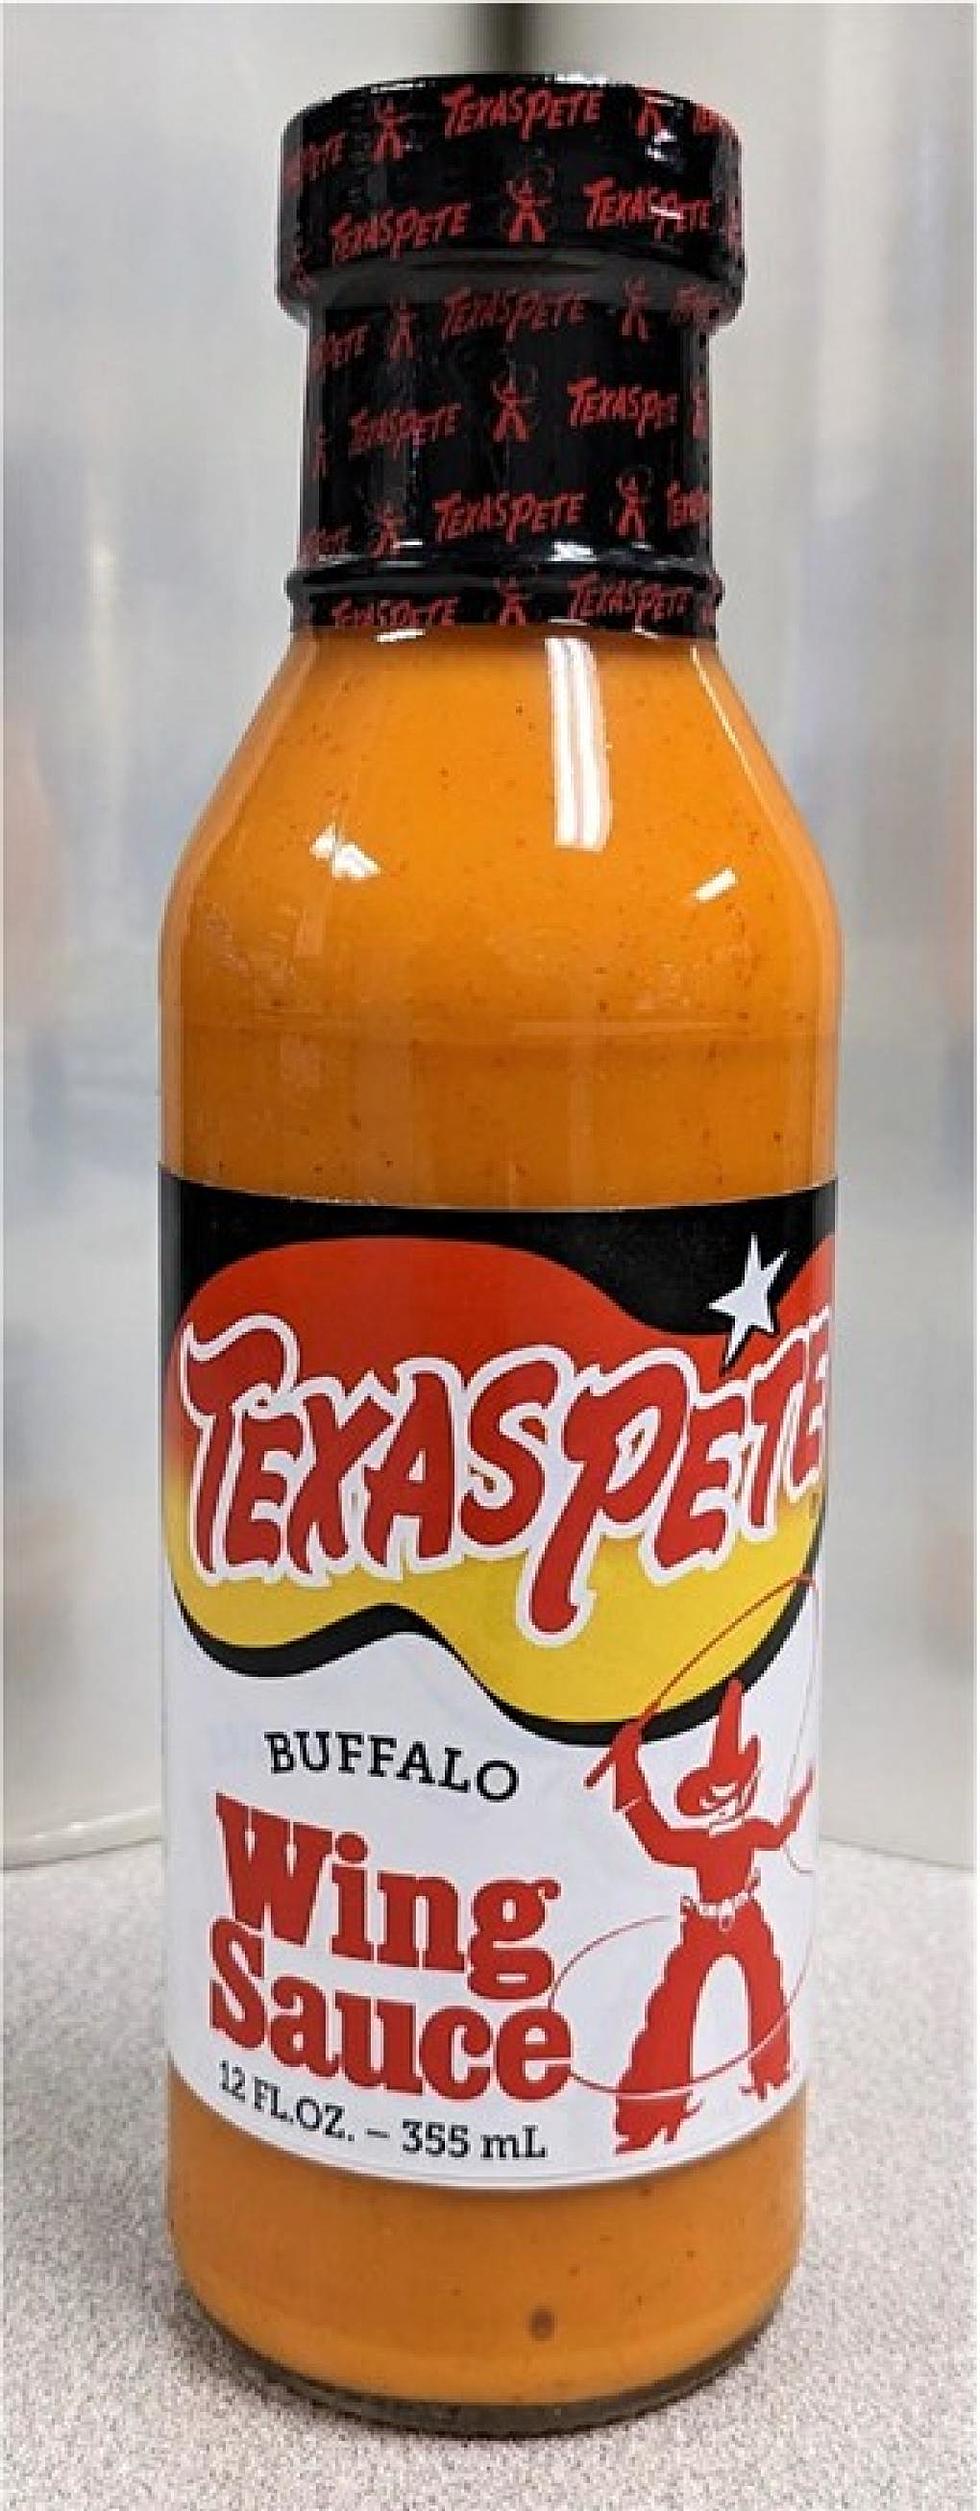 Hot Sauce Sold In New York May Cause 'Life-Threatening Reaction'